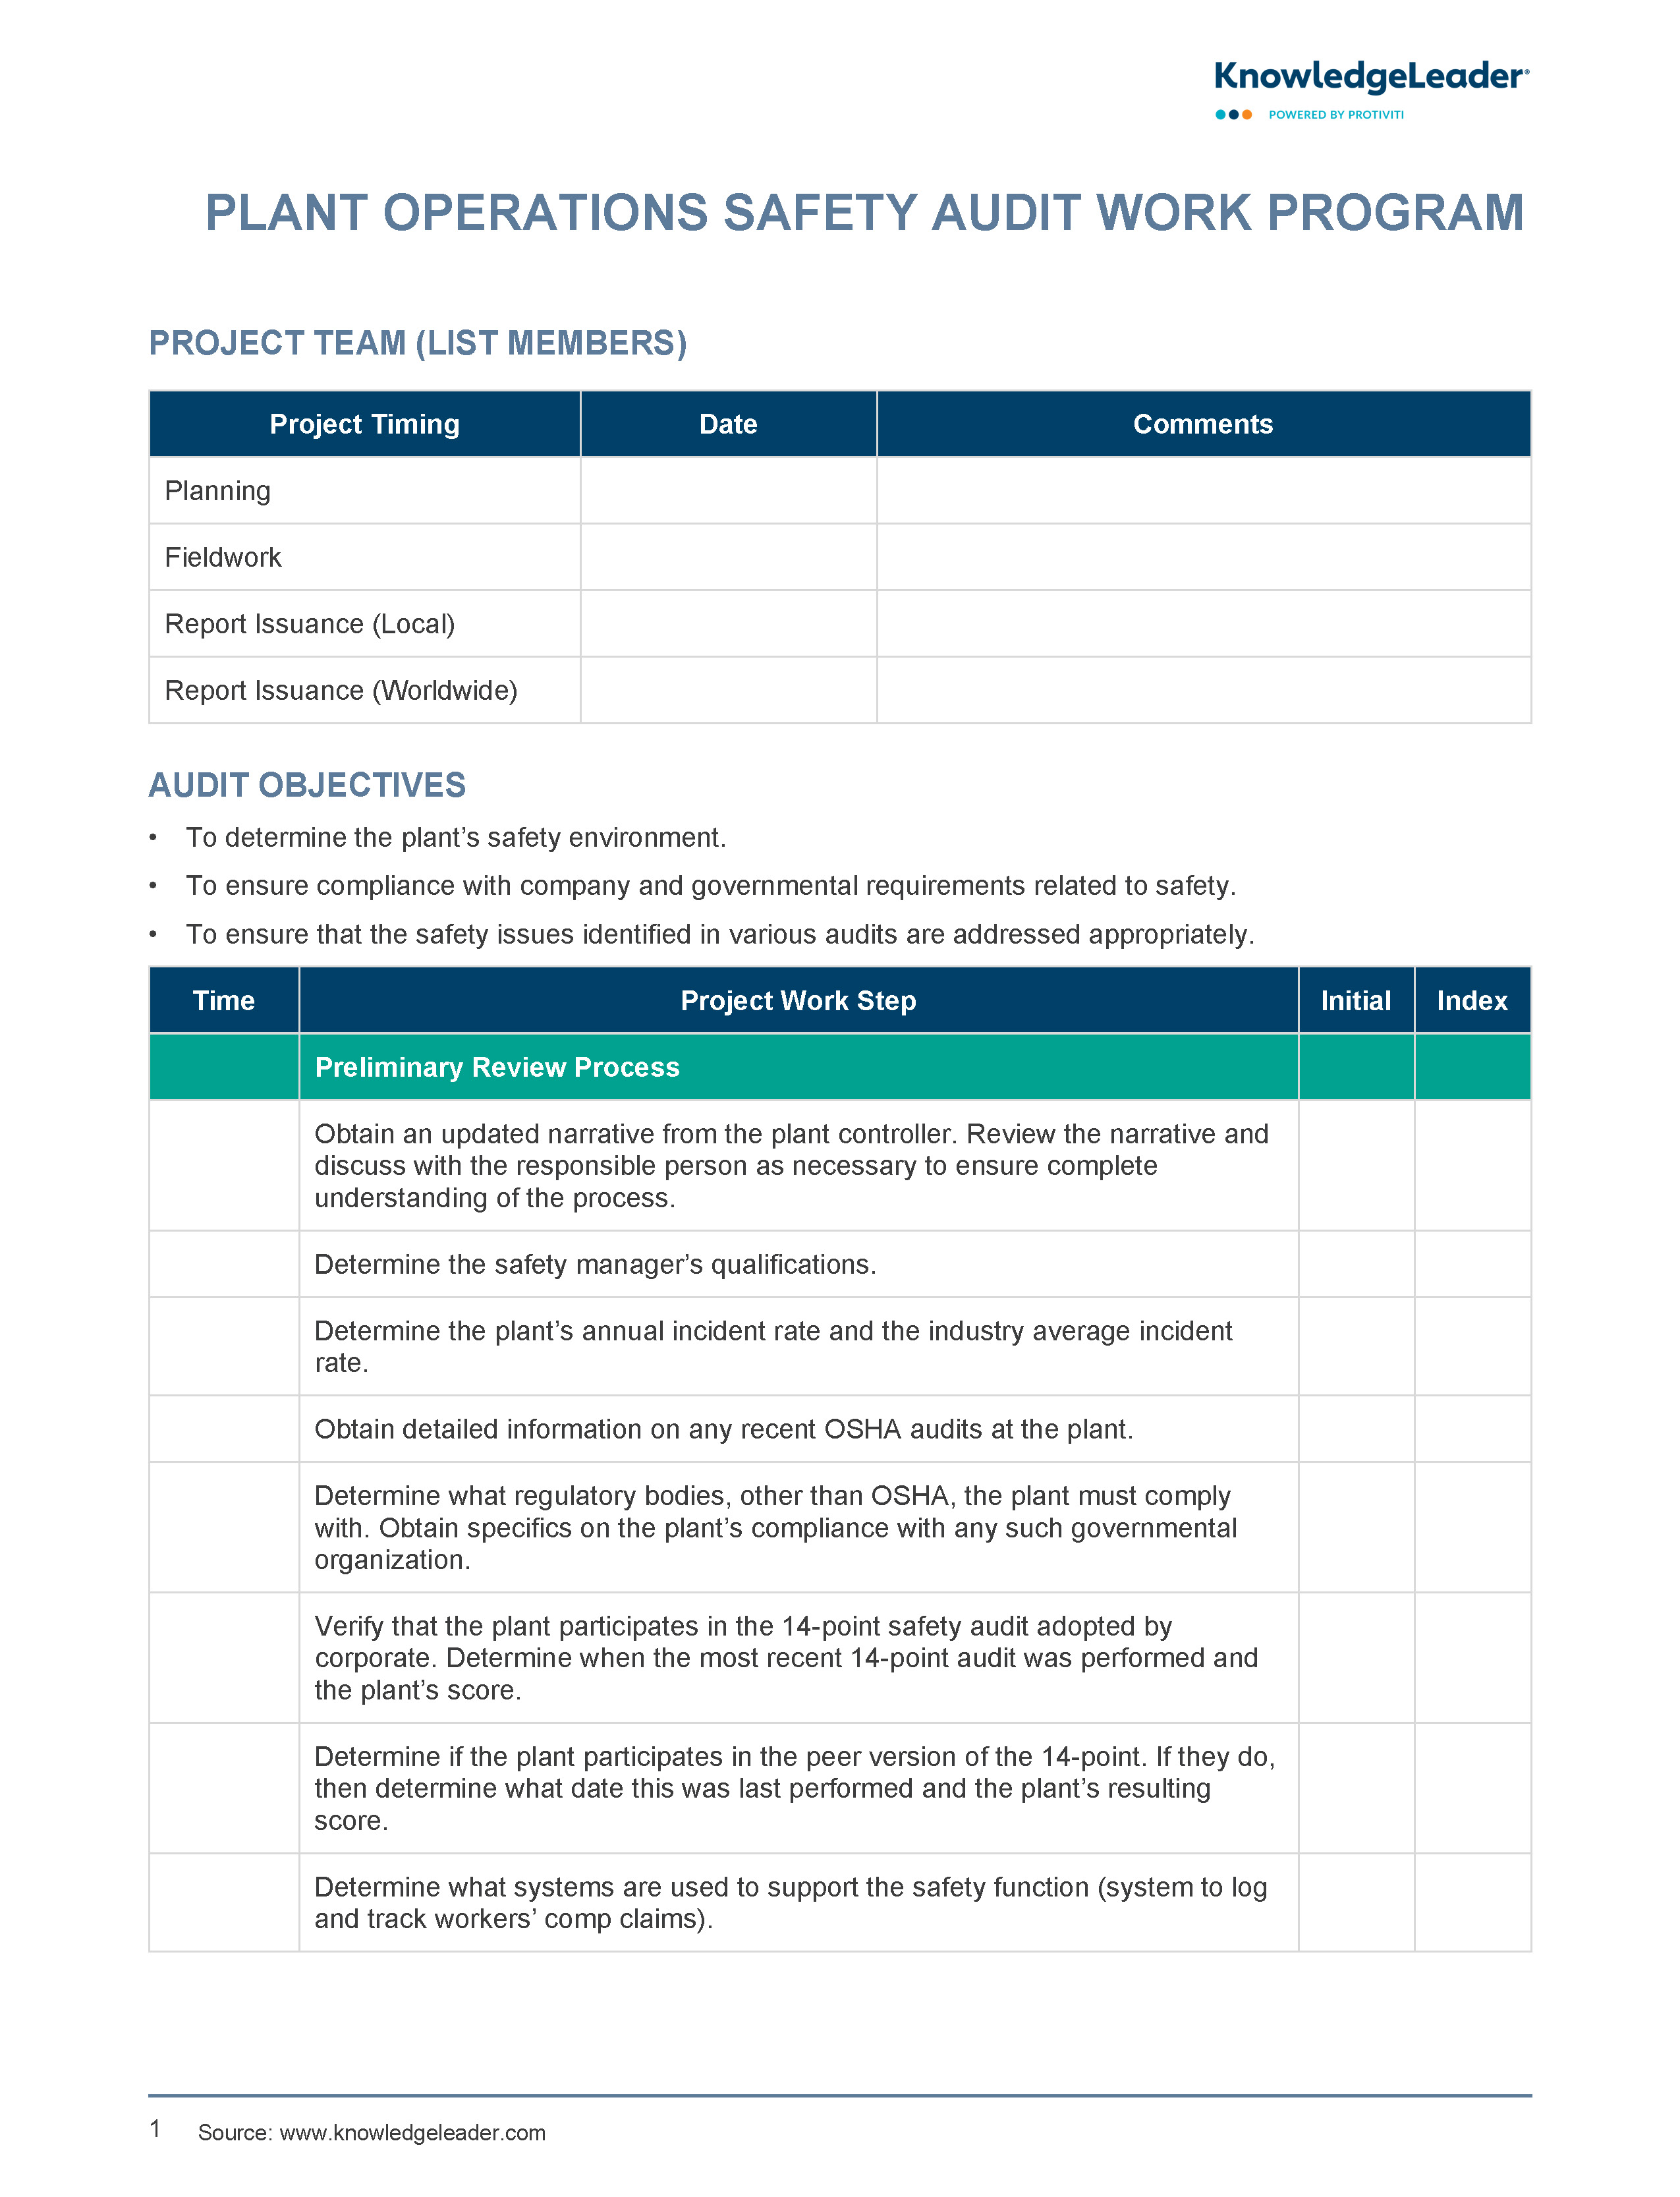 Screenshot of the first page of Plant Operations Safety Audit Work Program